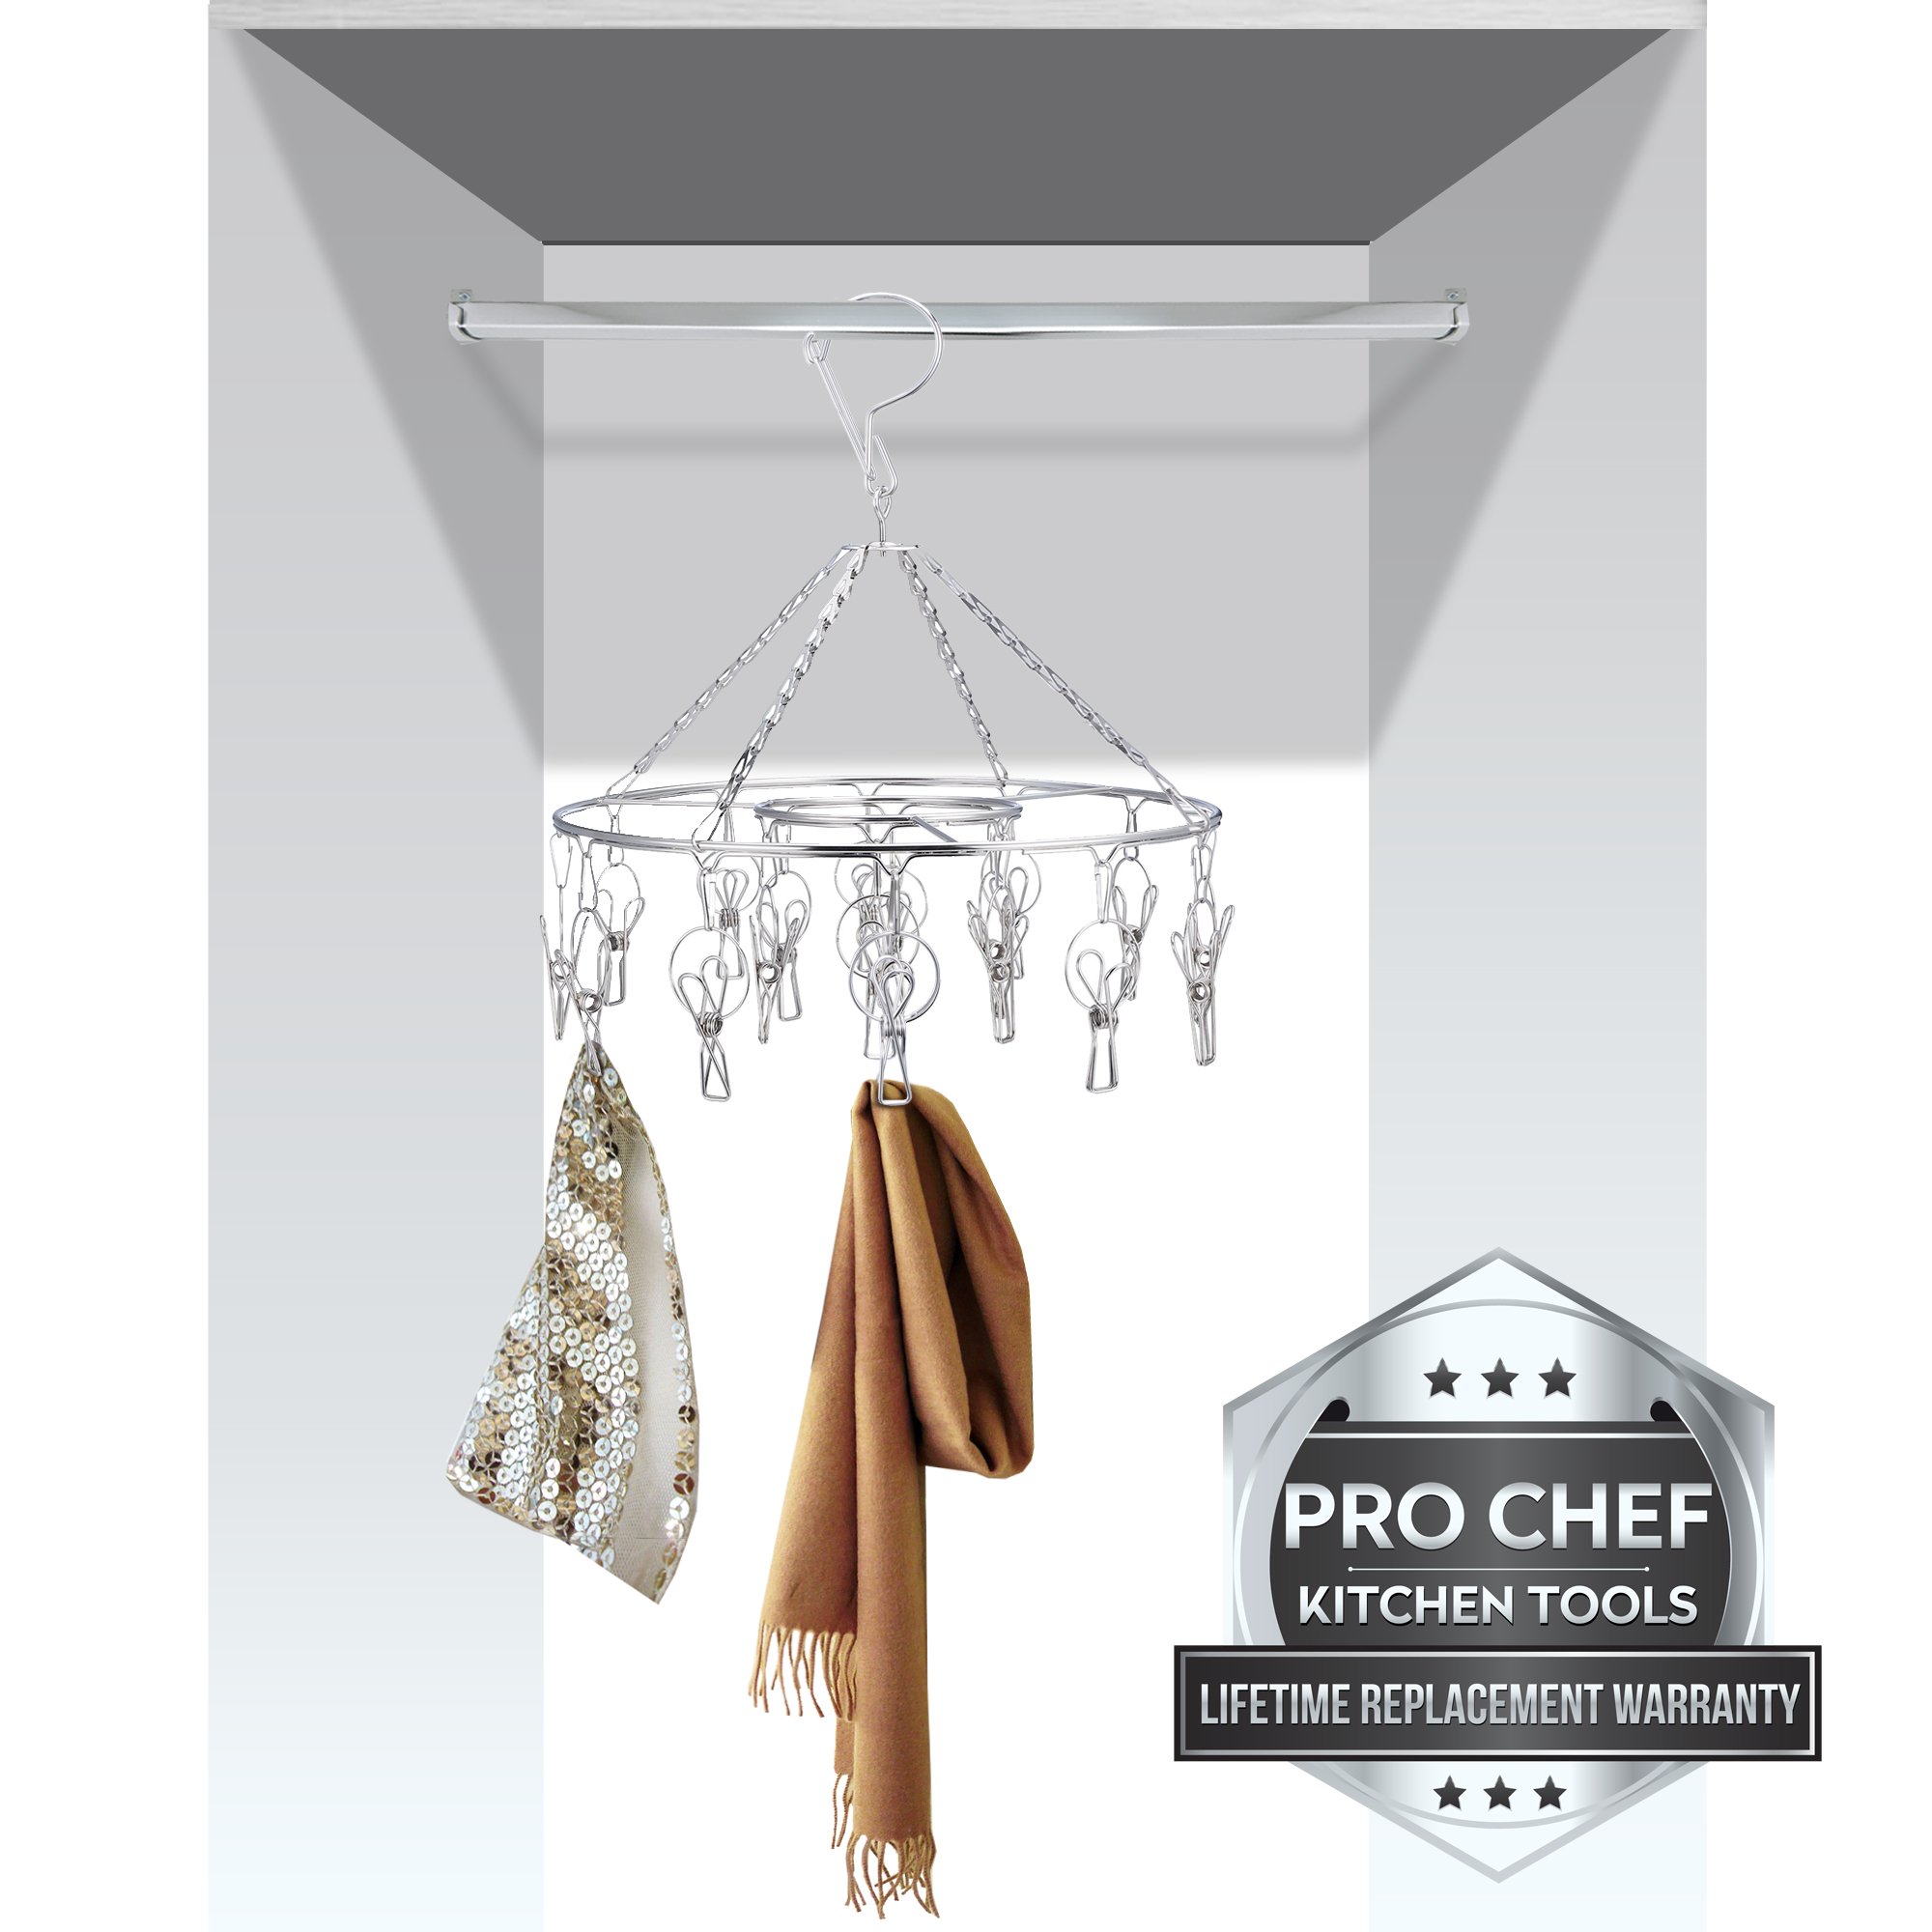 Pro Chef Kitchen Tools Clothes Drying Rack - Round Clothing Racks - Laundry Portable Clothesline Includes 18 Metal Clothespins Hanger Clips Set - Baby Clothes Storage Closet - Herb Hanging Air Dryer